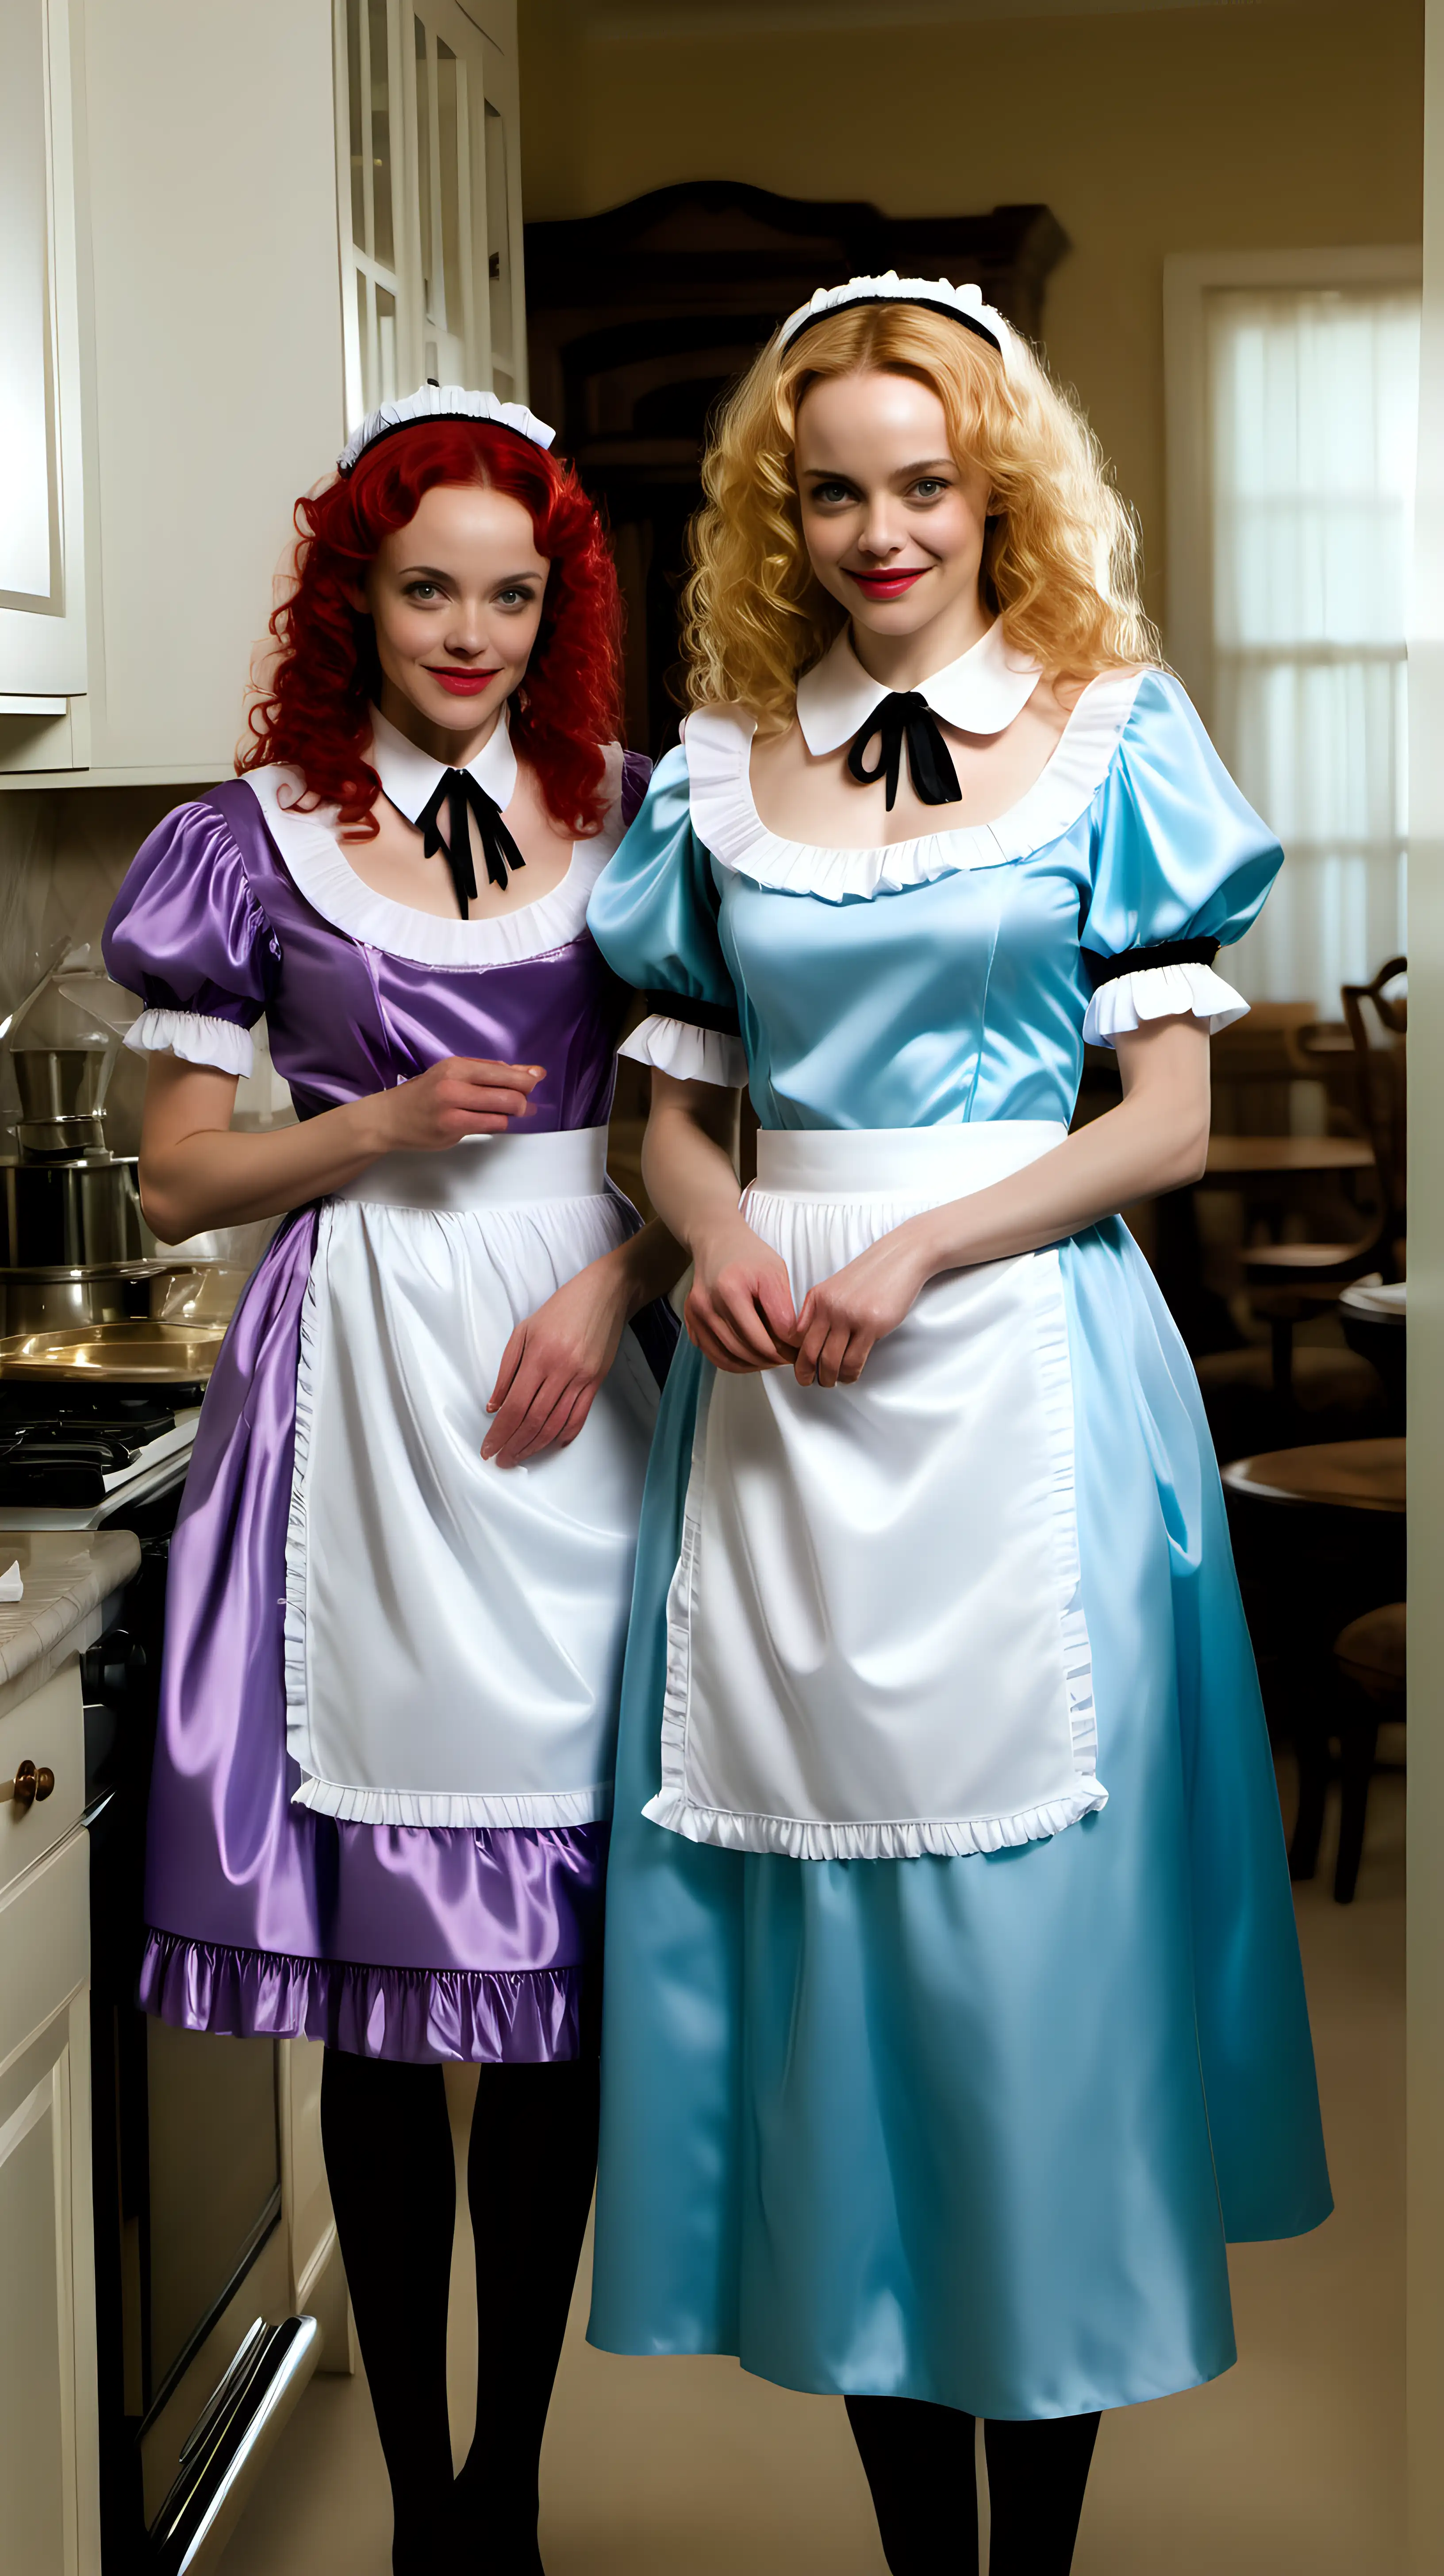 girls in long crystal silk retro strong style sky BLUE and lila
english maid gown with apron and peter pan colar and long and short sleeves costume and milf mothers long blonde and red hair,black hair Heather Graham and Rachel Mcadams smile in house